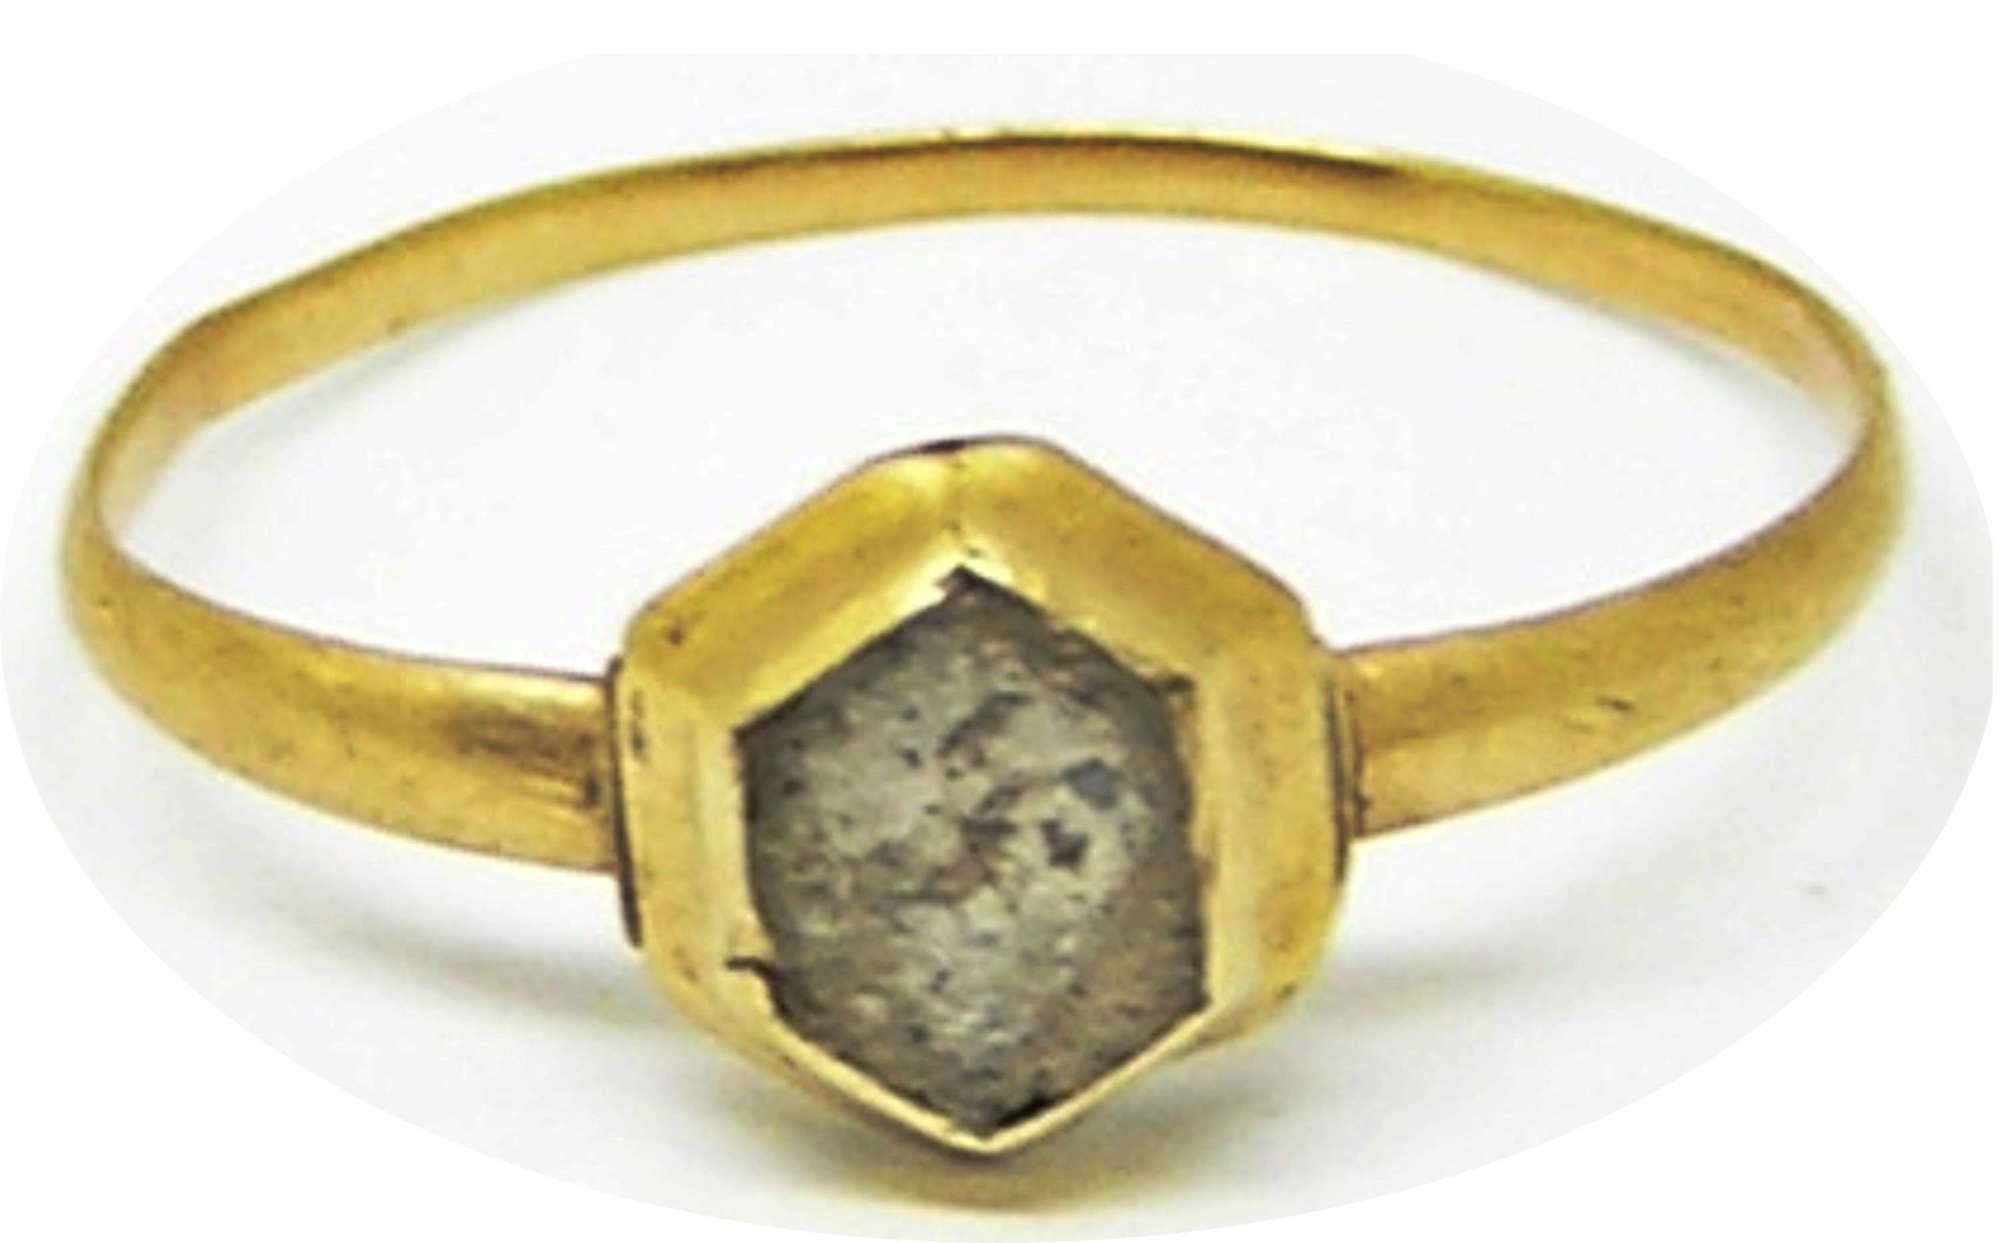 Medieval gold and finger ring in excavated condition